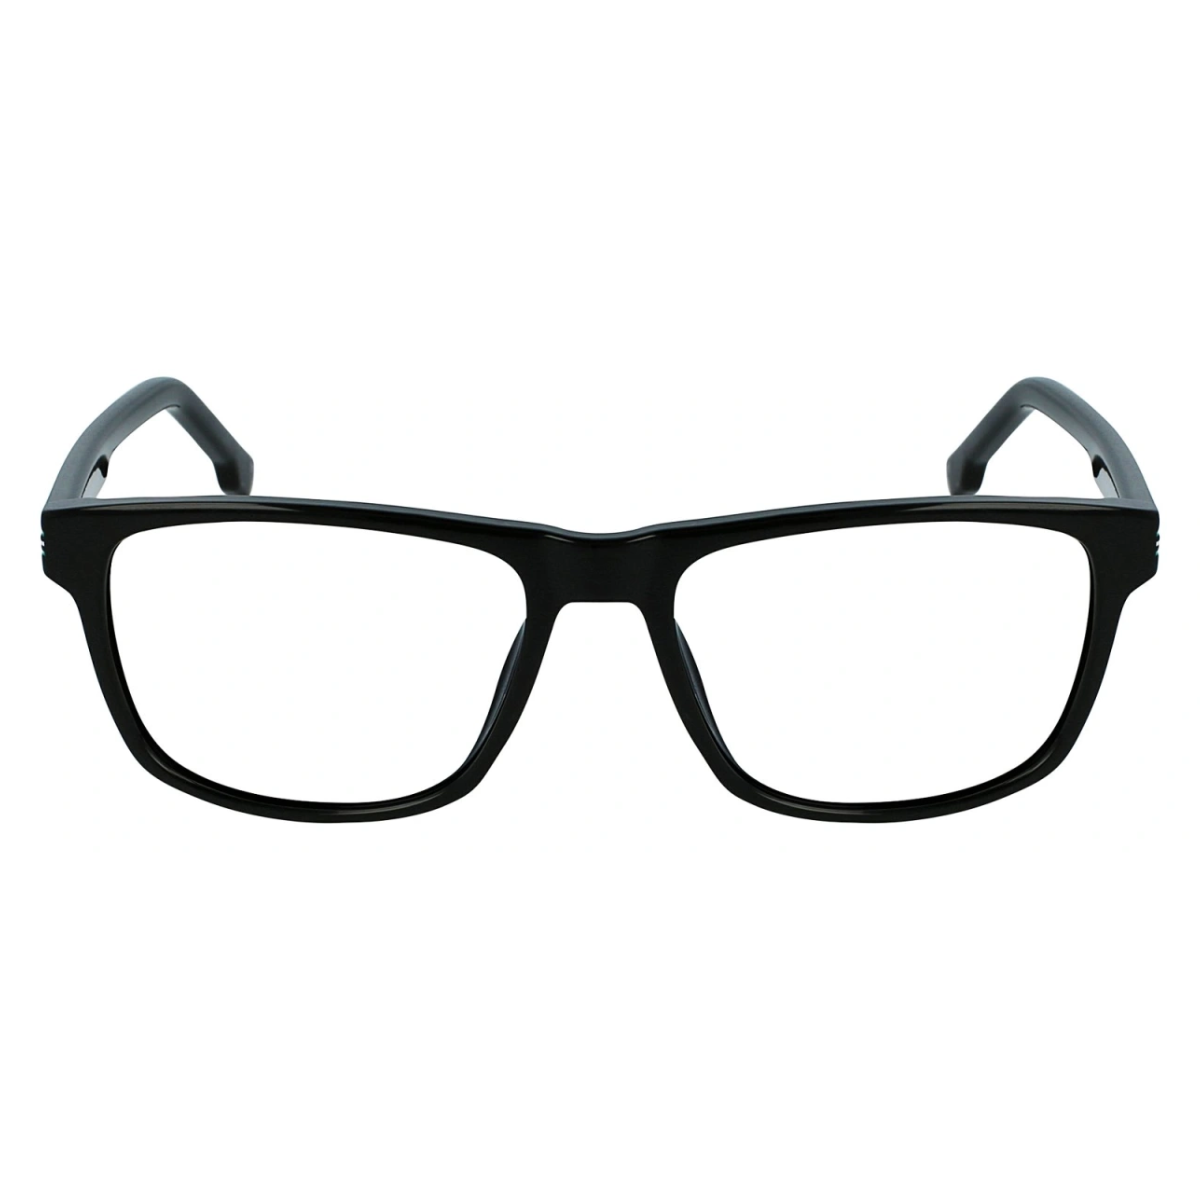 Lacoste 2887 Frame